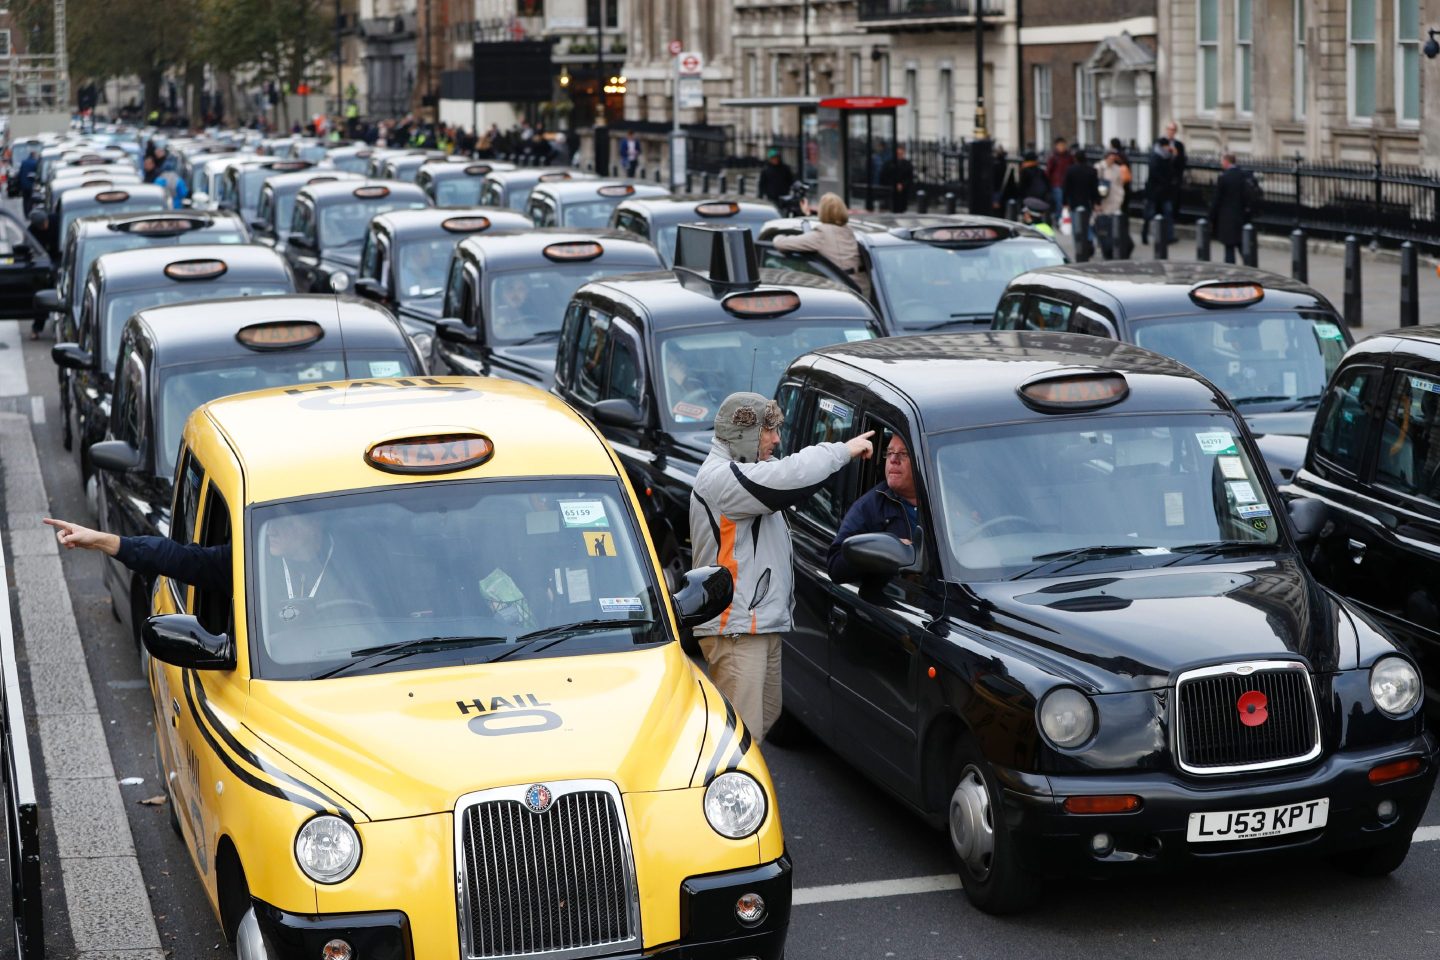 Black cab taxi drivers block a road in central London as they protest against how transport is run in the capital on November 8, 2016.